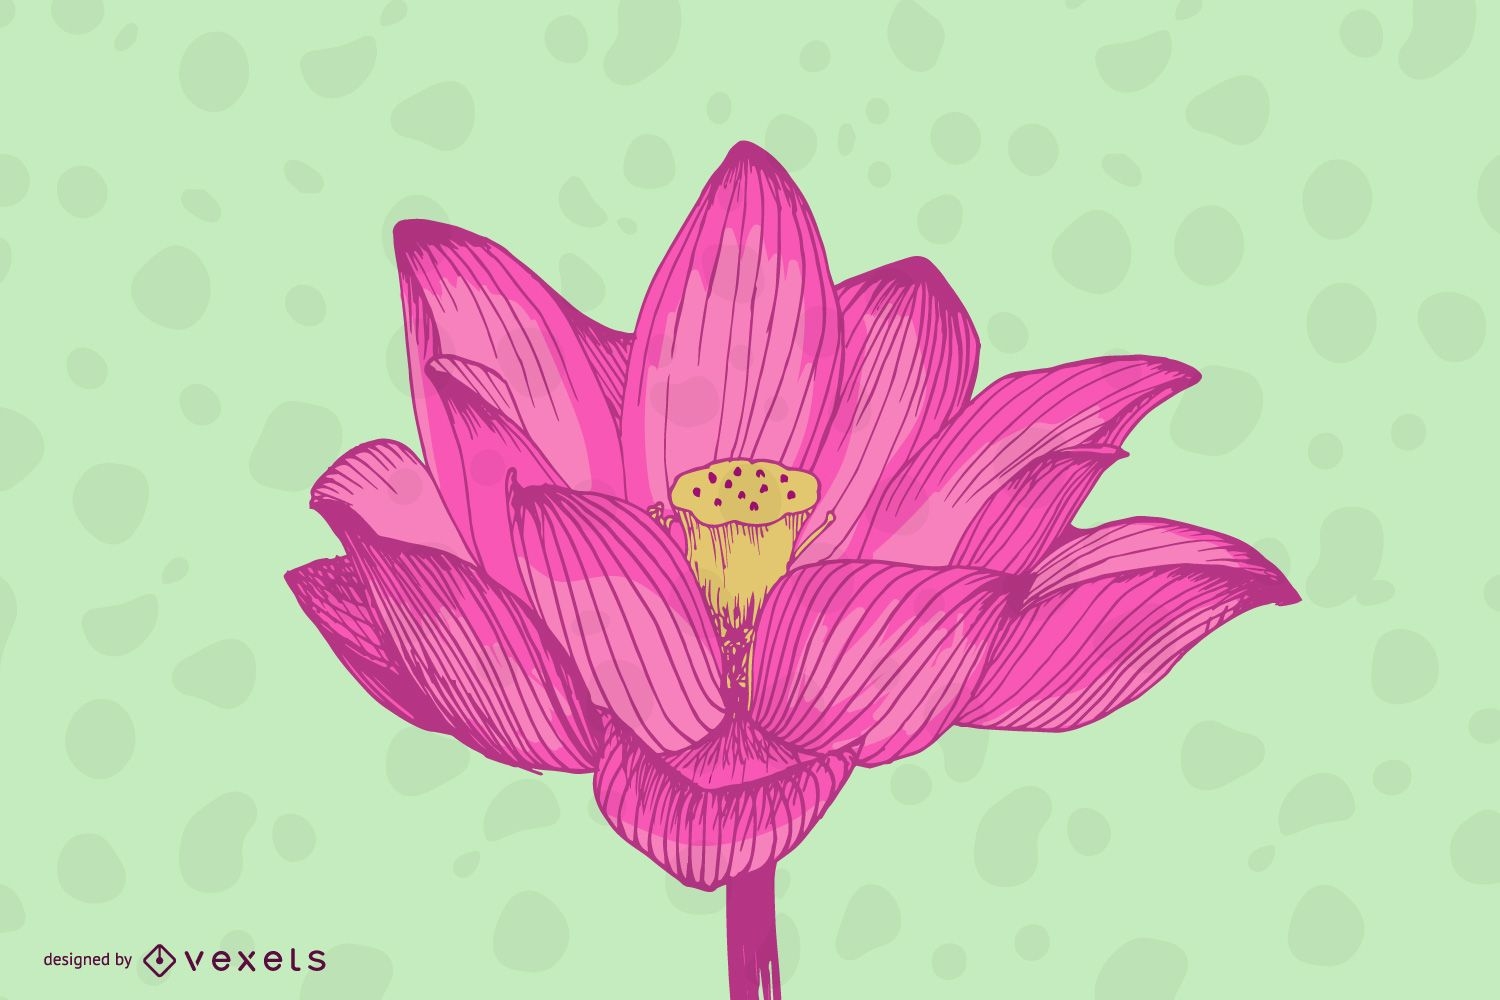 Lotus flower. Got some new prismacolor pencils. Thought i would draw you  guys a flower. : r/drawing